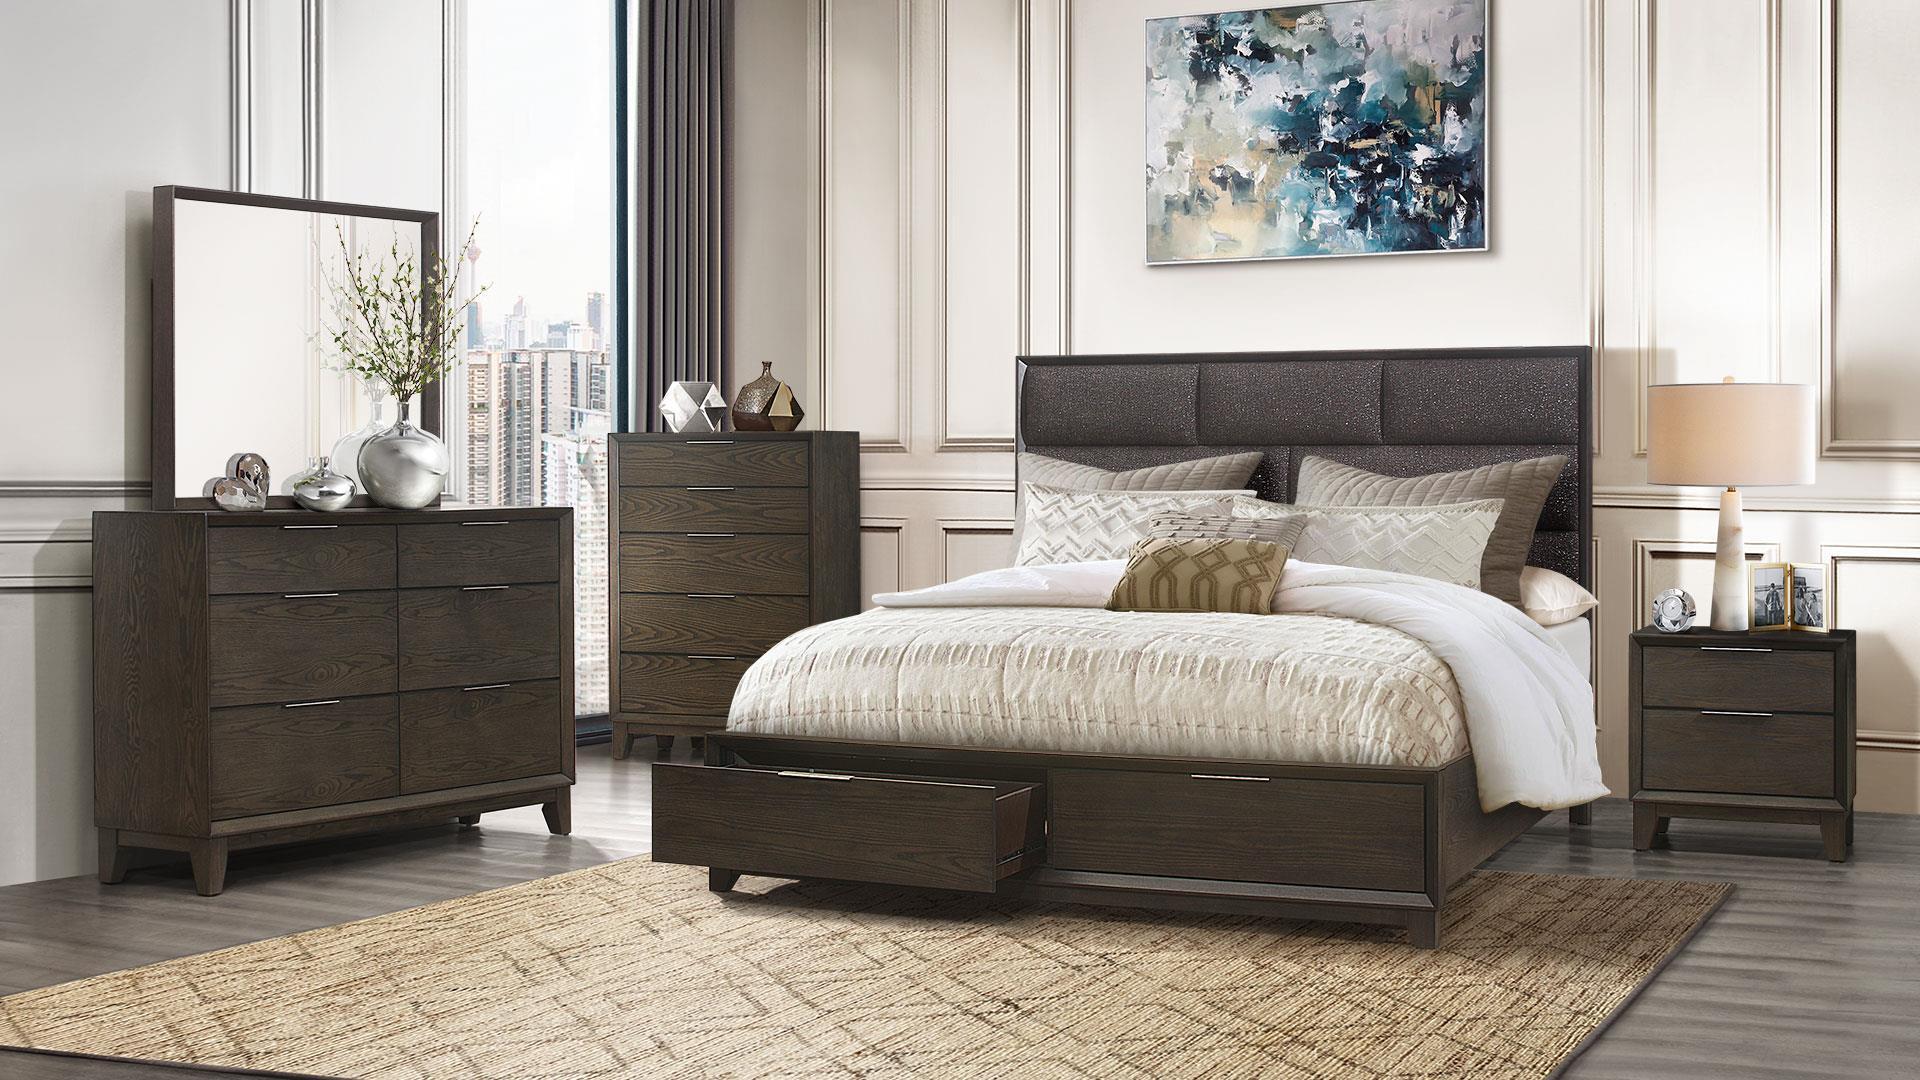 Contemporary Platform Bedroom Set WILLOW WILLOW-KB-Set-6 in Gray, Chocolate Fabric